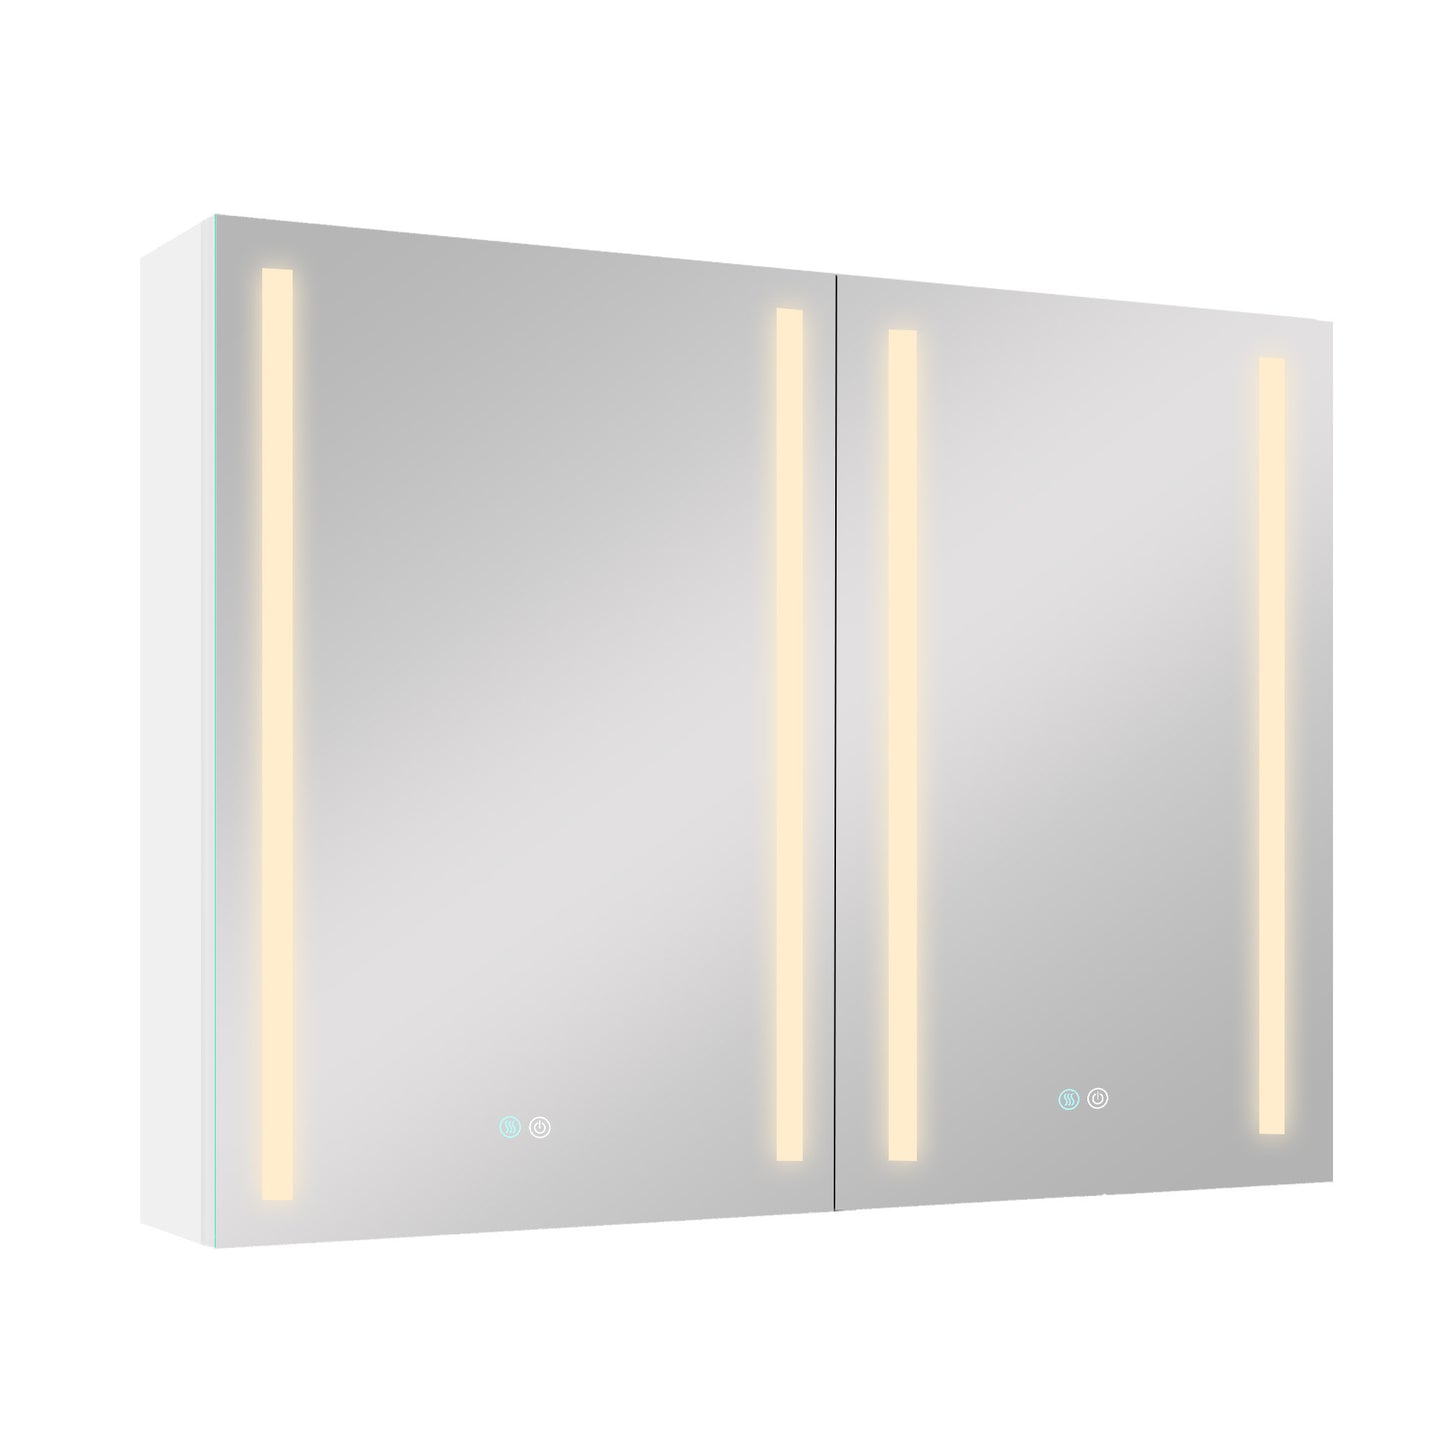 40x30 Inch LED Bathroom Medicine Cabinet Surface Mount Double Door Lighted Medicine Cabinet, Medicine Cabinets for Bathroom with Mirror Defogging, Dimmer White